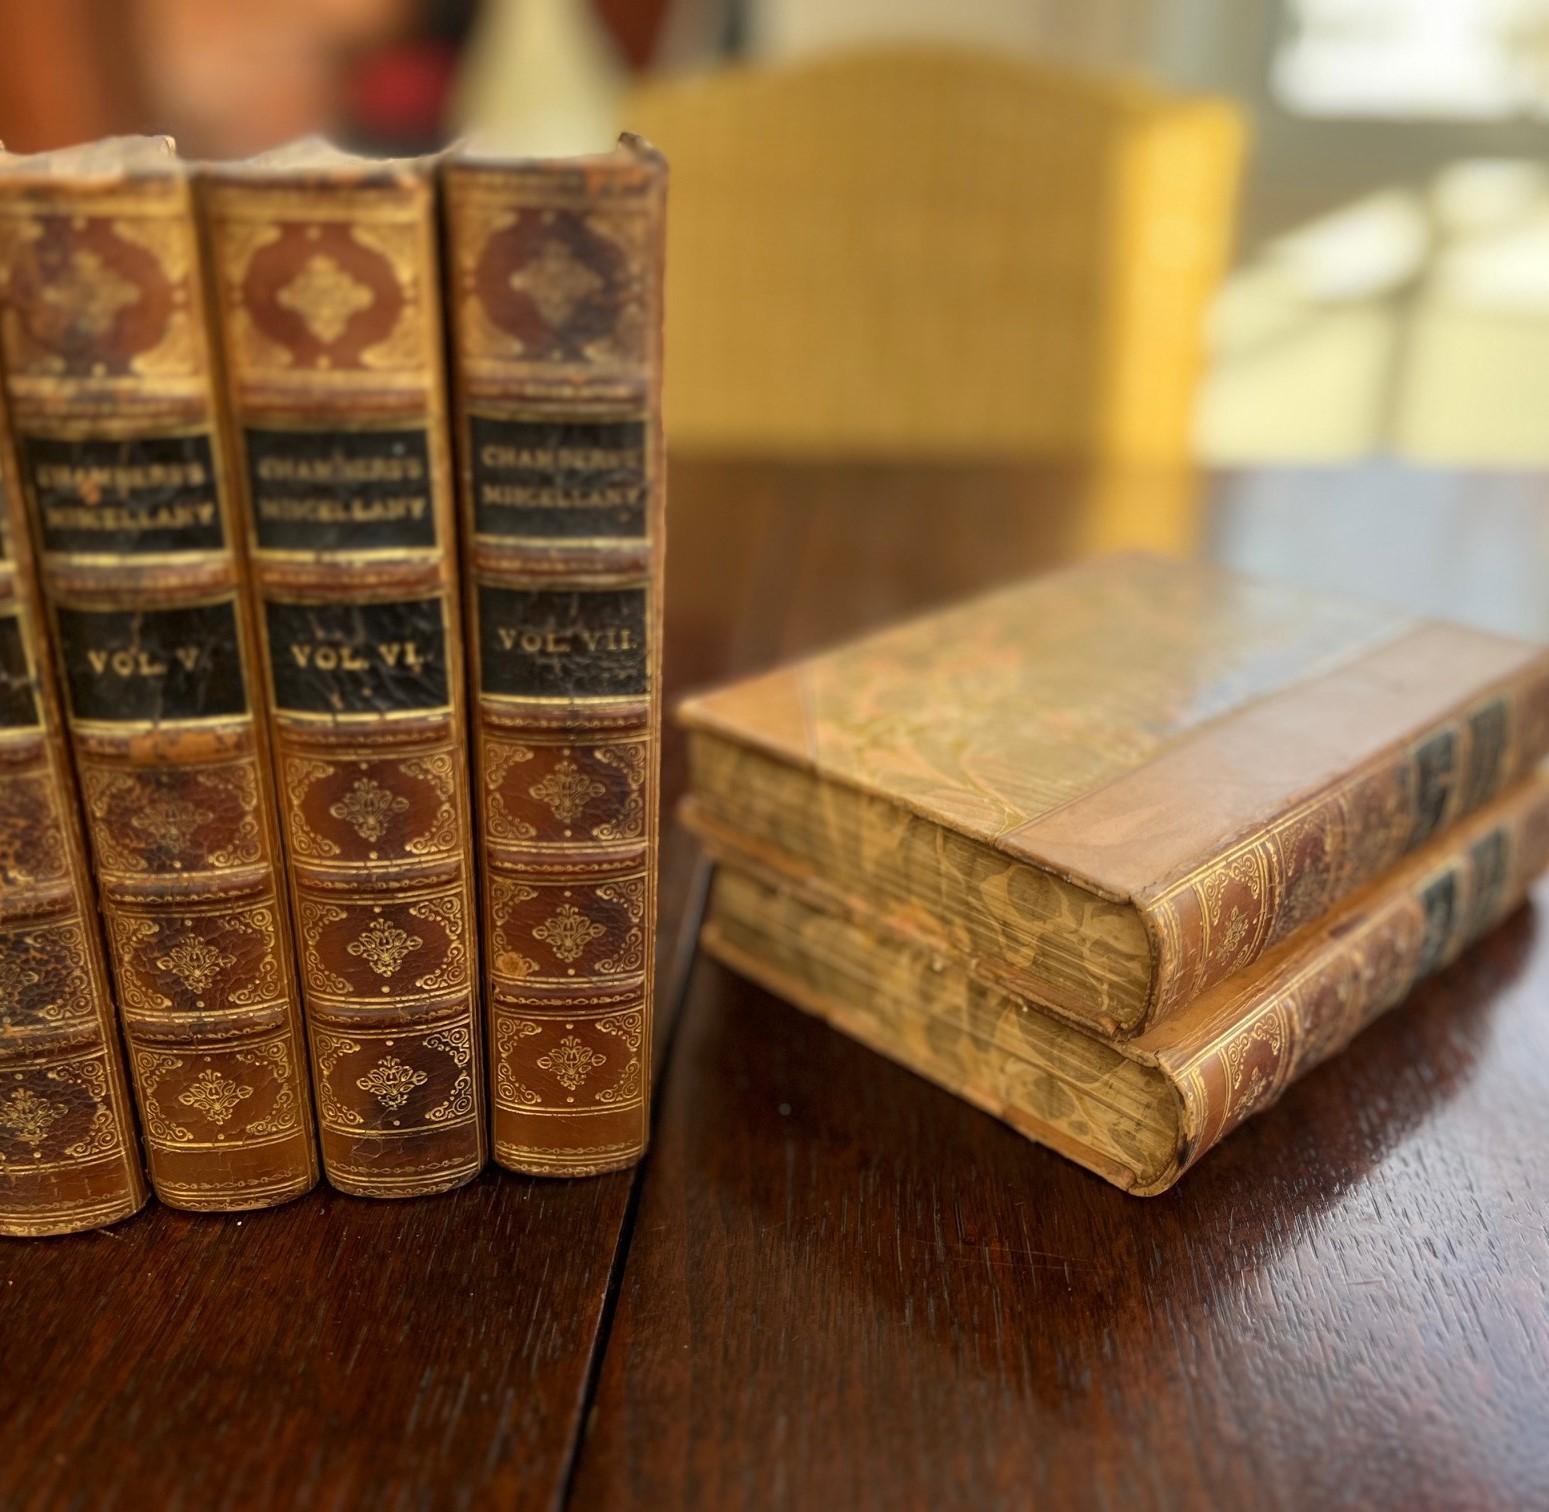 Late 19th Century 1872 Chambers's Miscellany of Instructive and Entertaining Tracts - 8 Volumes For Sale